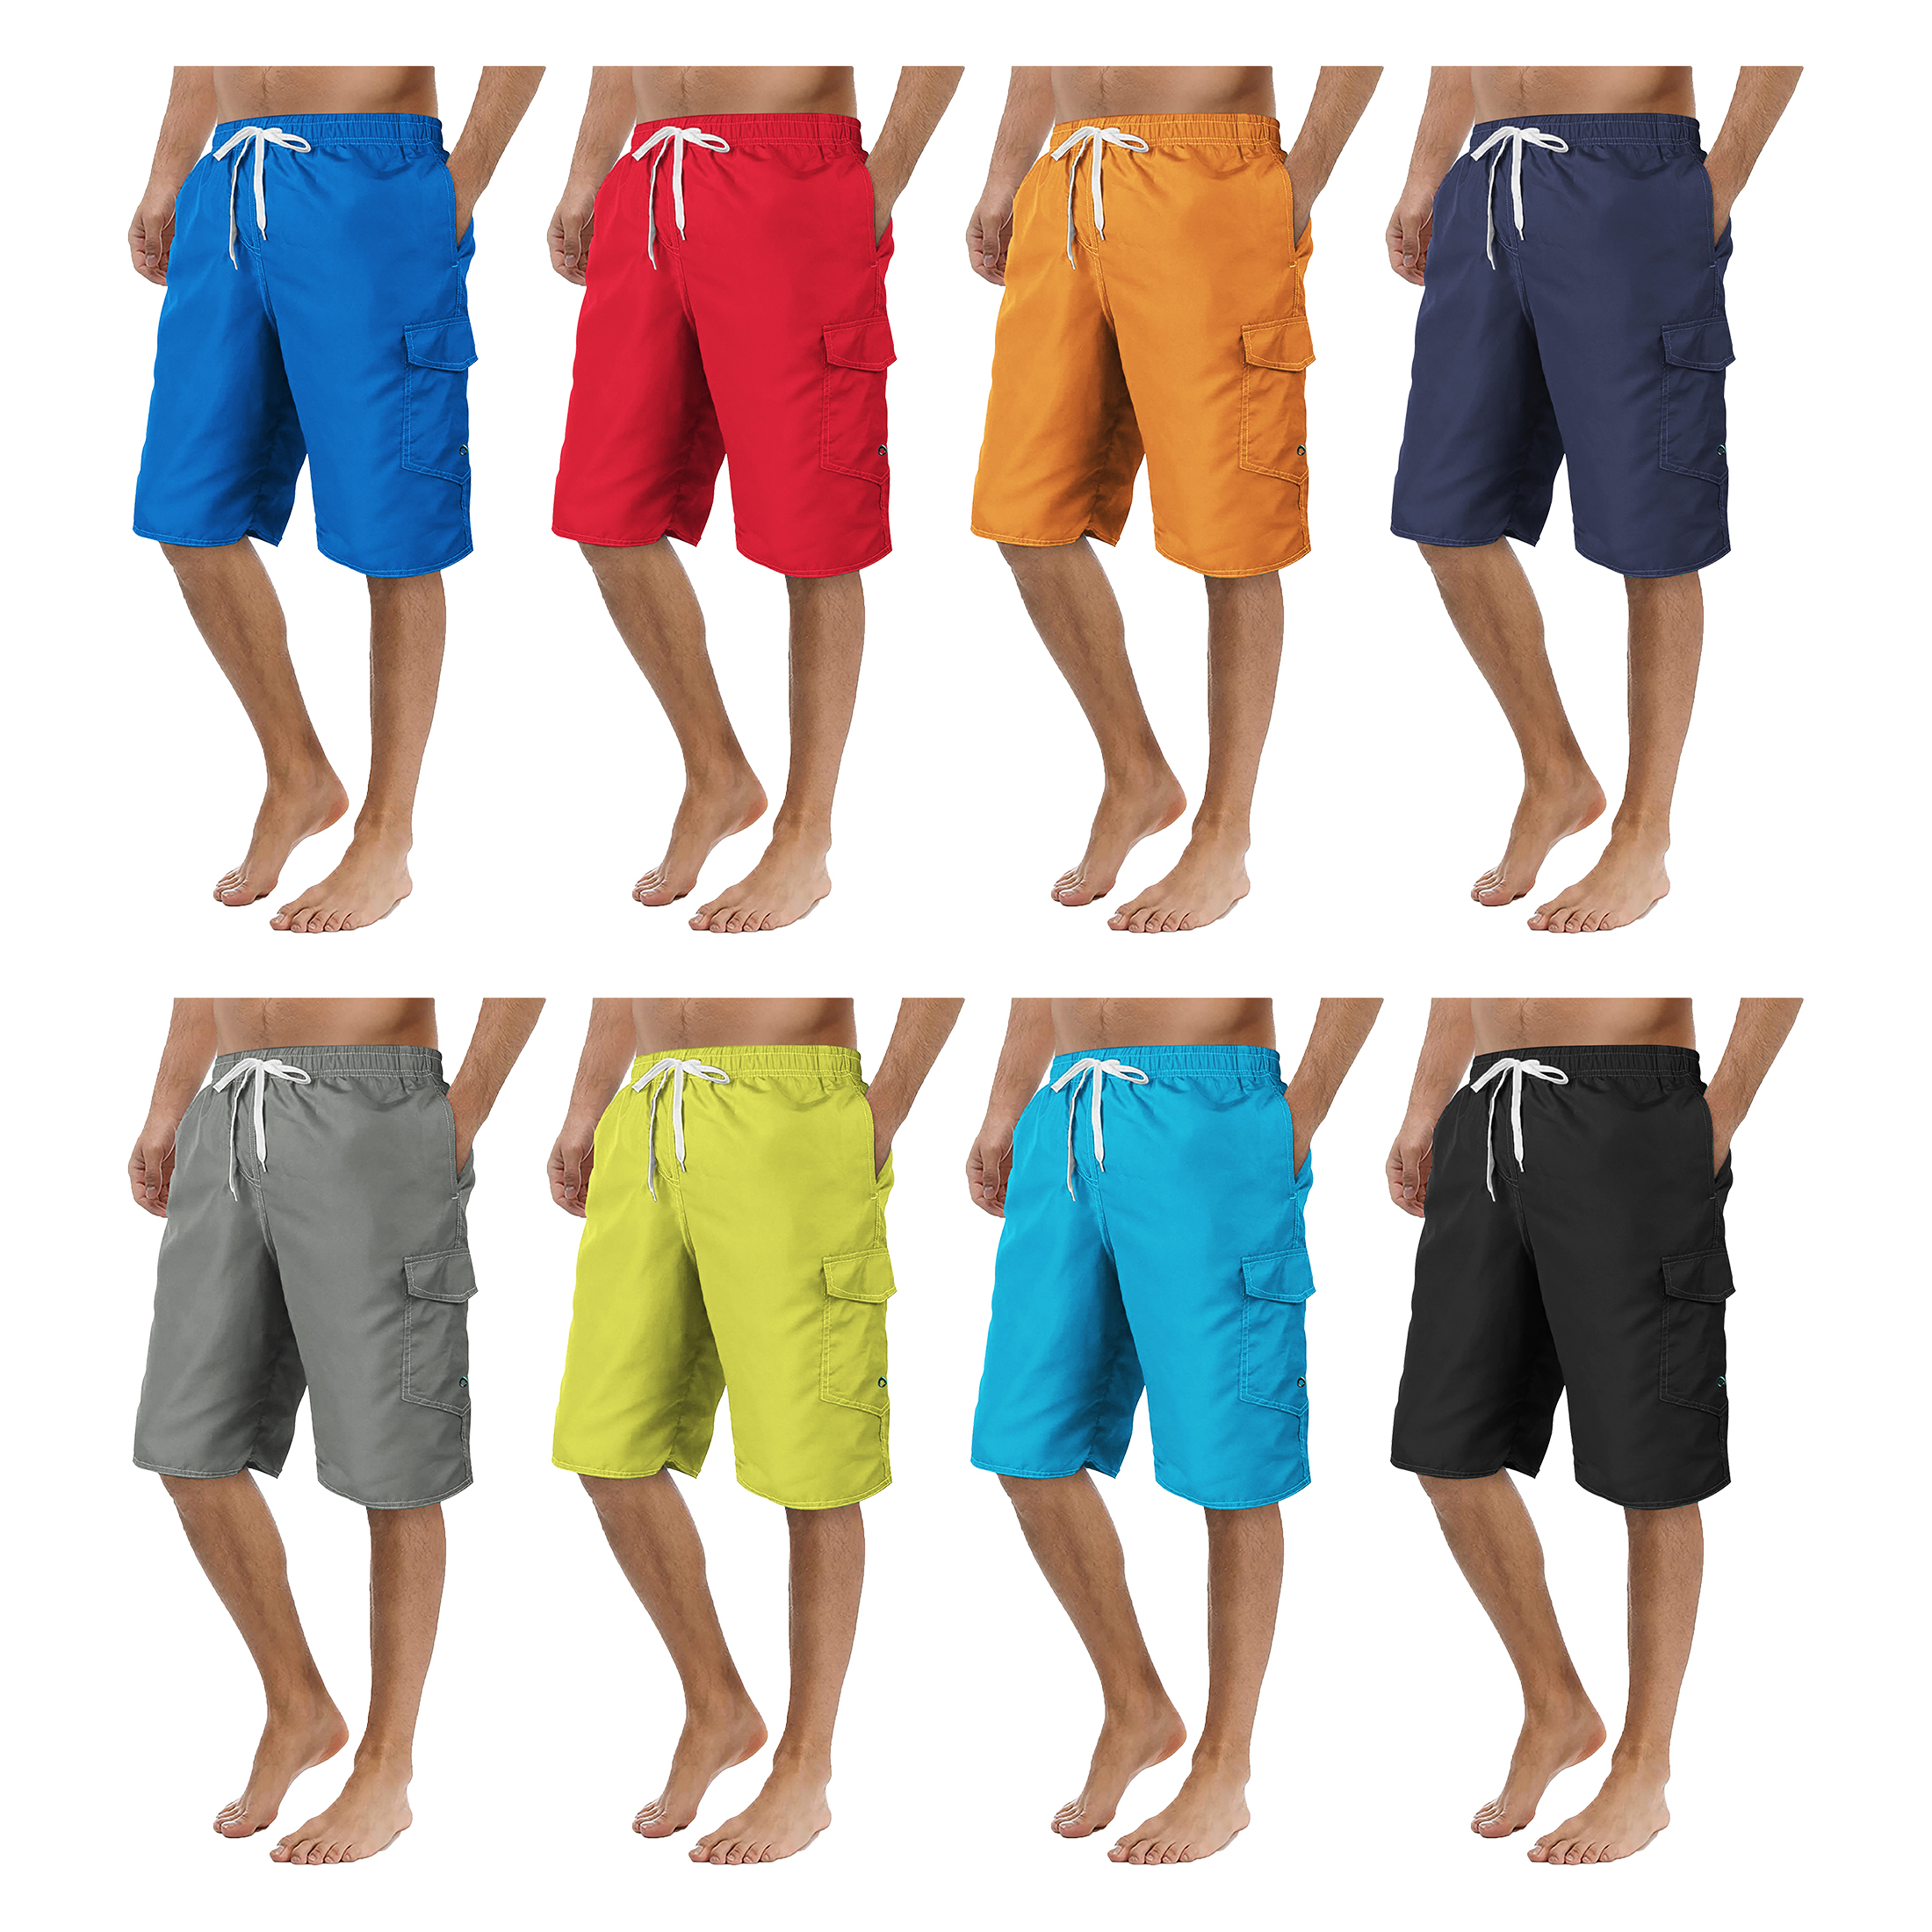 4-Pack Men's Quick Dry Cargo Swim Trunks Beachwear Bathing Suits With Pockets Solid Flex Board Shorts - L